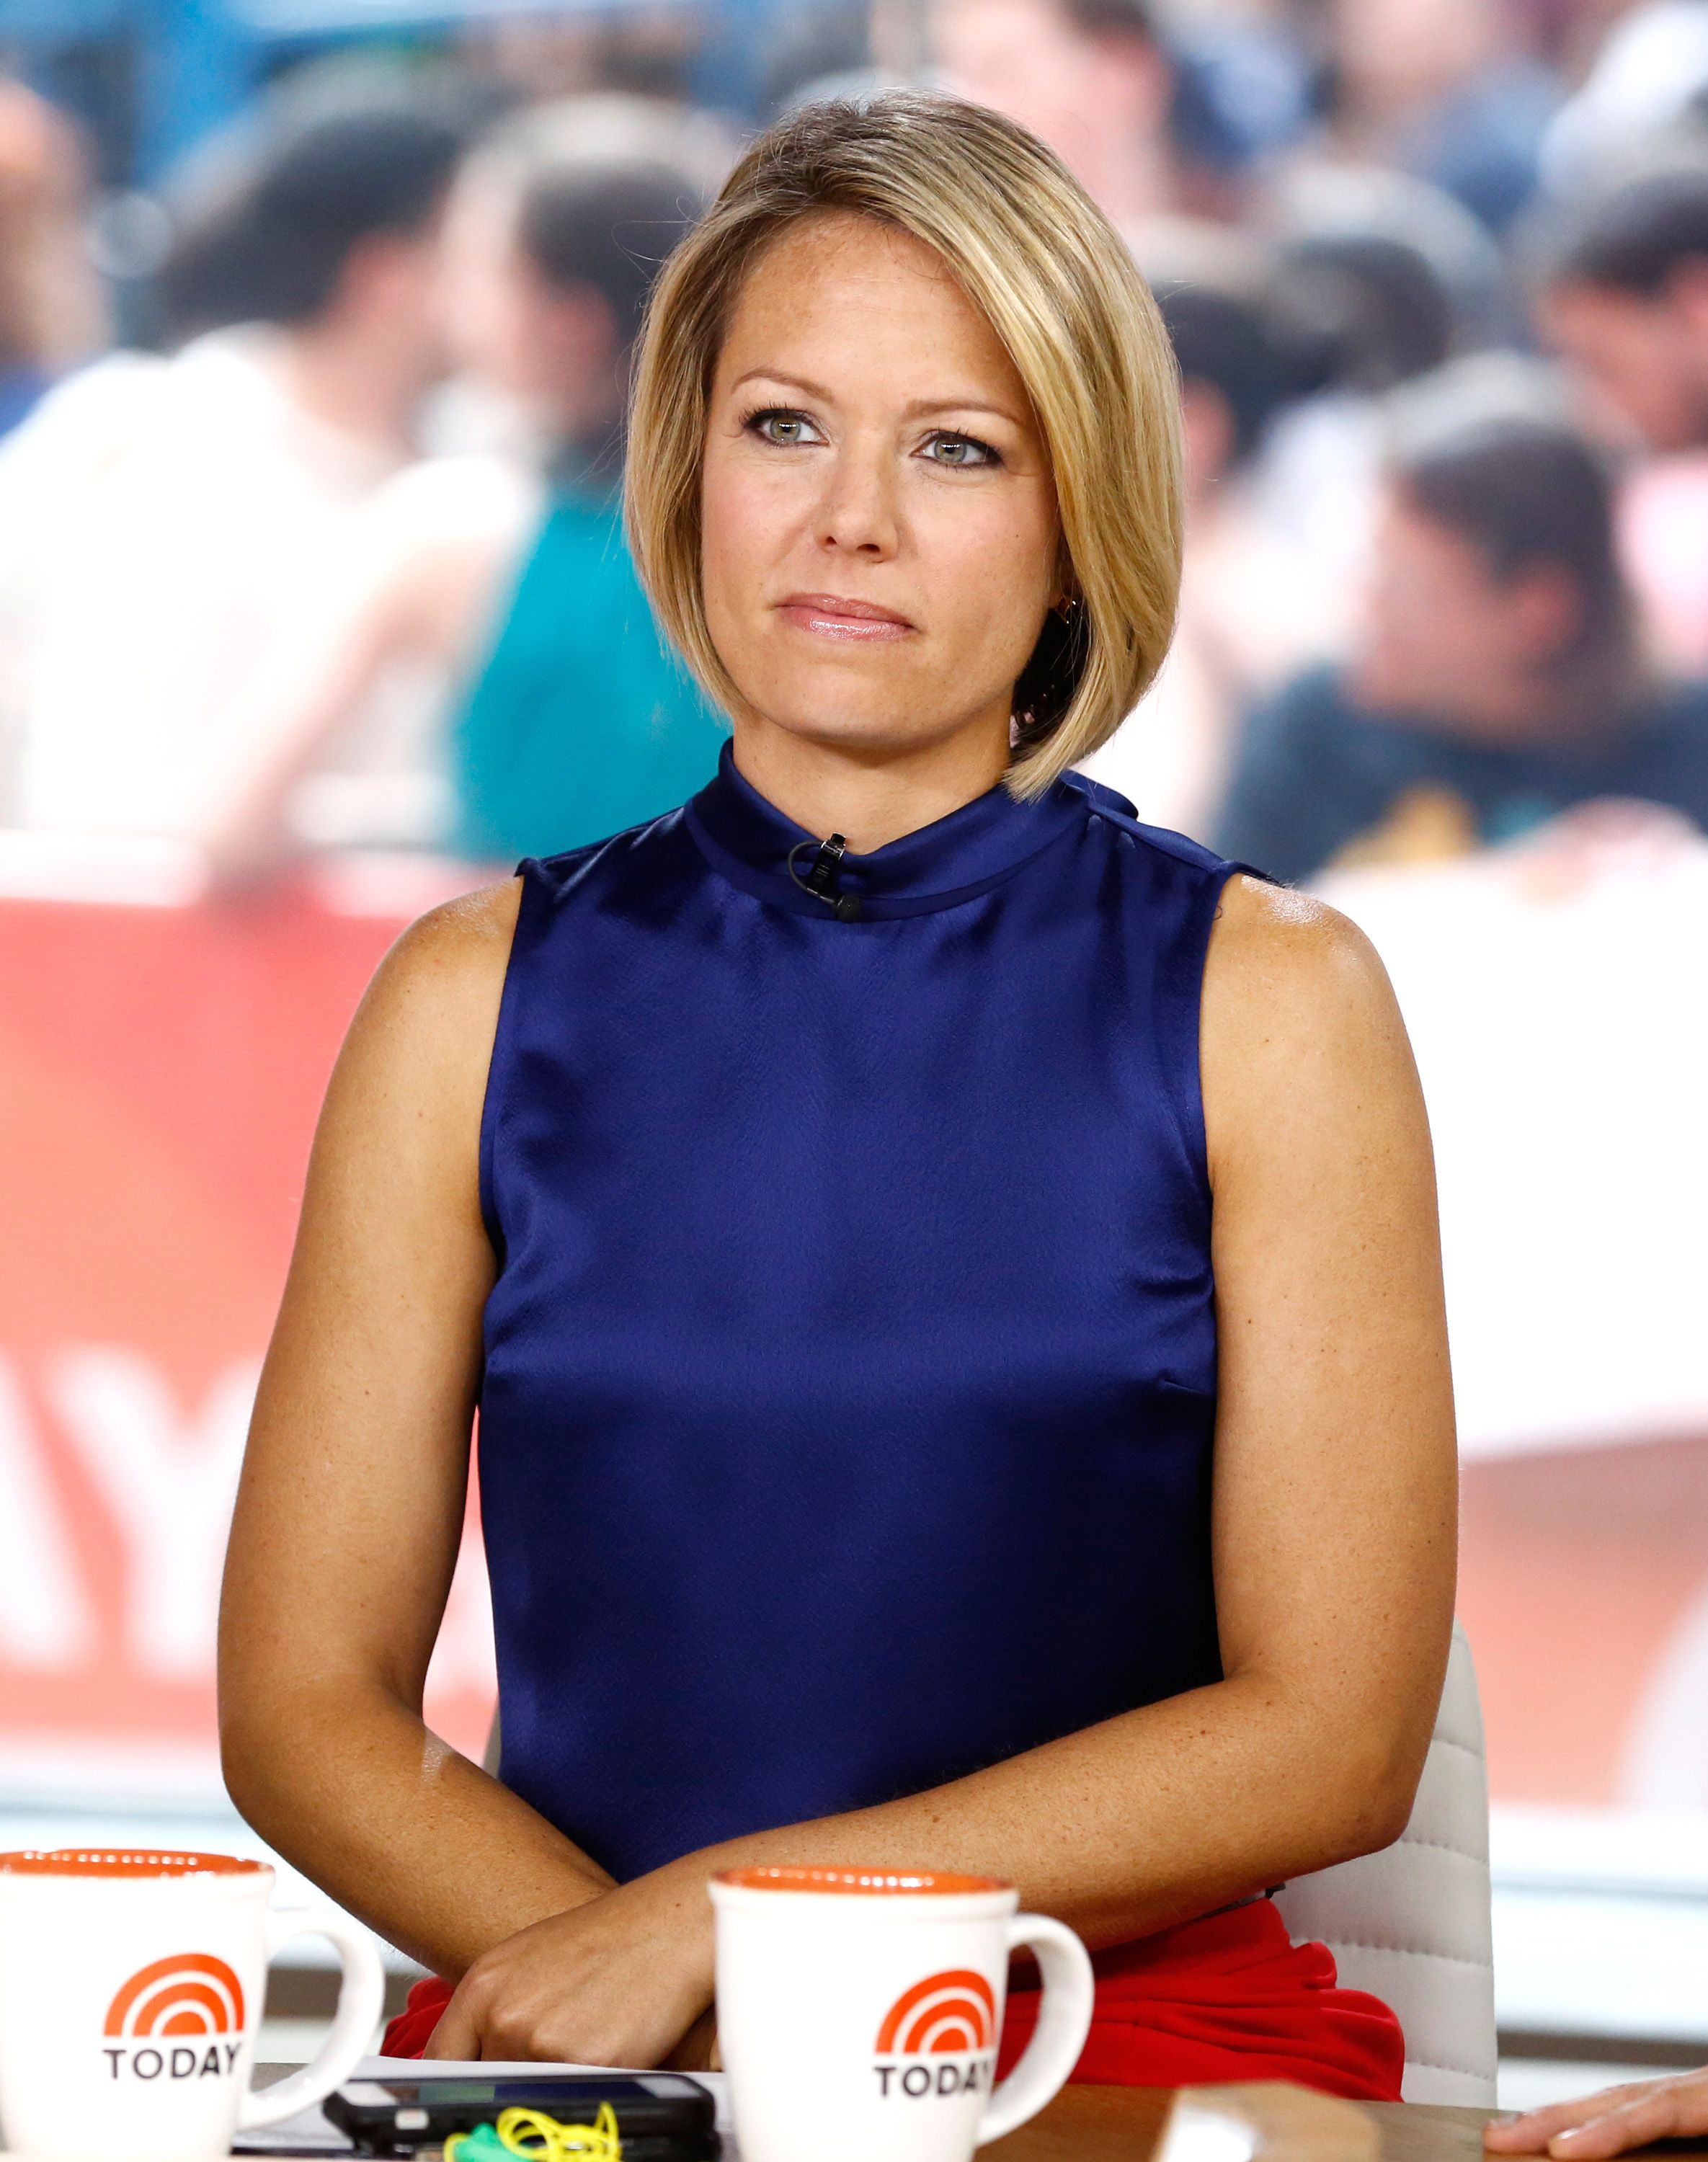 Dylan Dreyer appears on season 63 of NBC News' "Today" show on September 01, 2014 | Photo: Peter Kramer/NBC/NBC Newswire/NBCUniversal/Getty Images